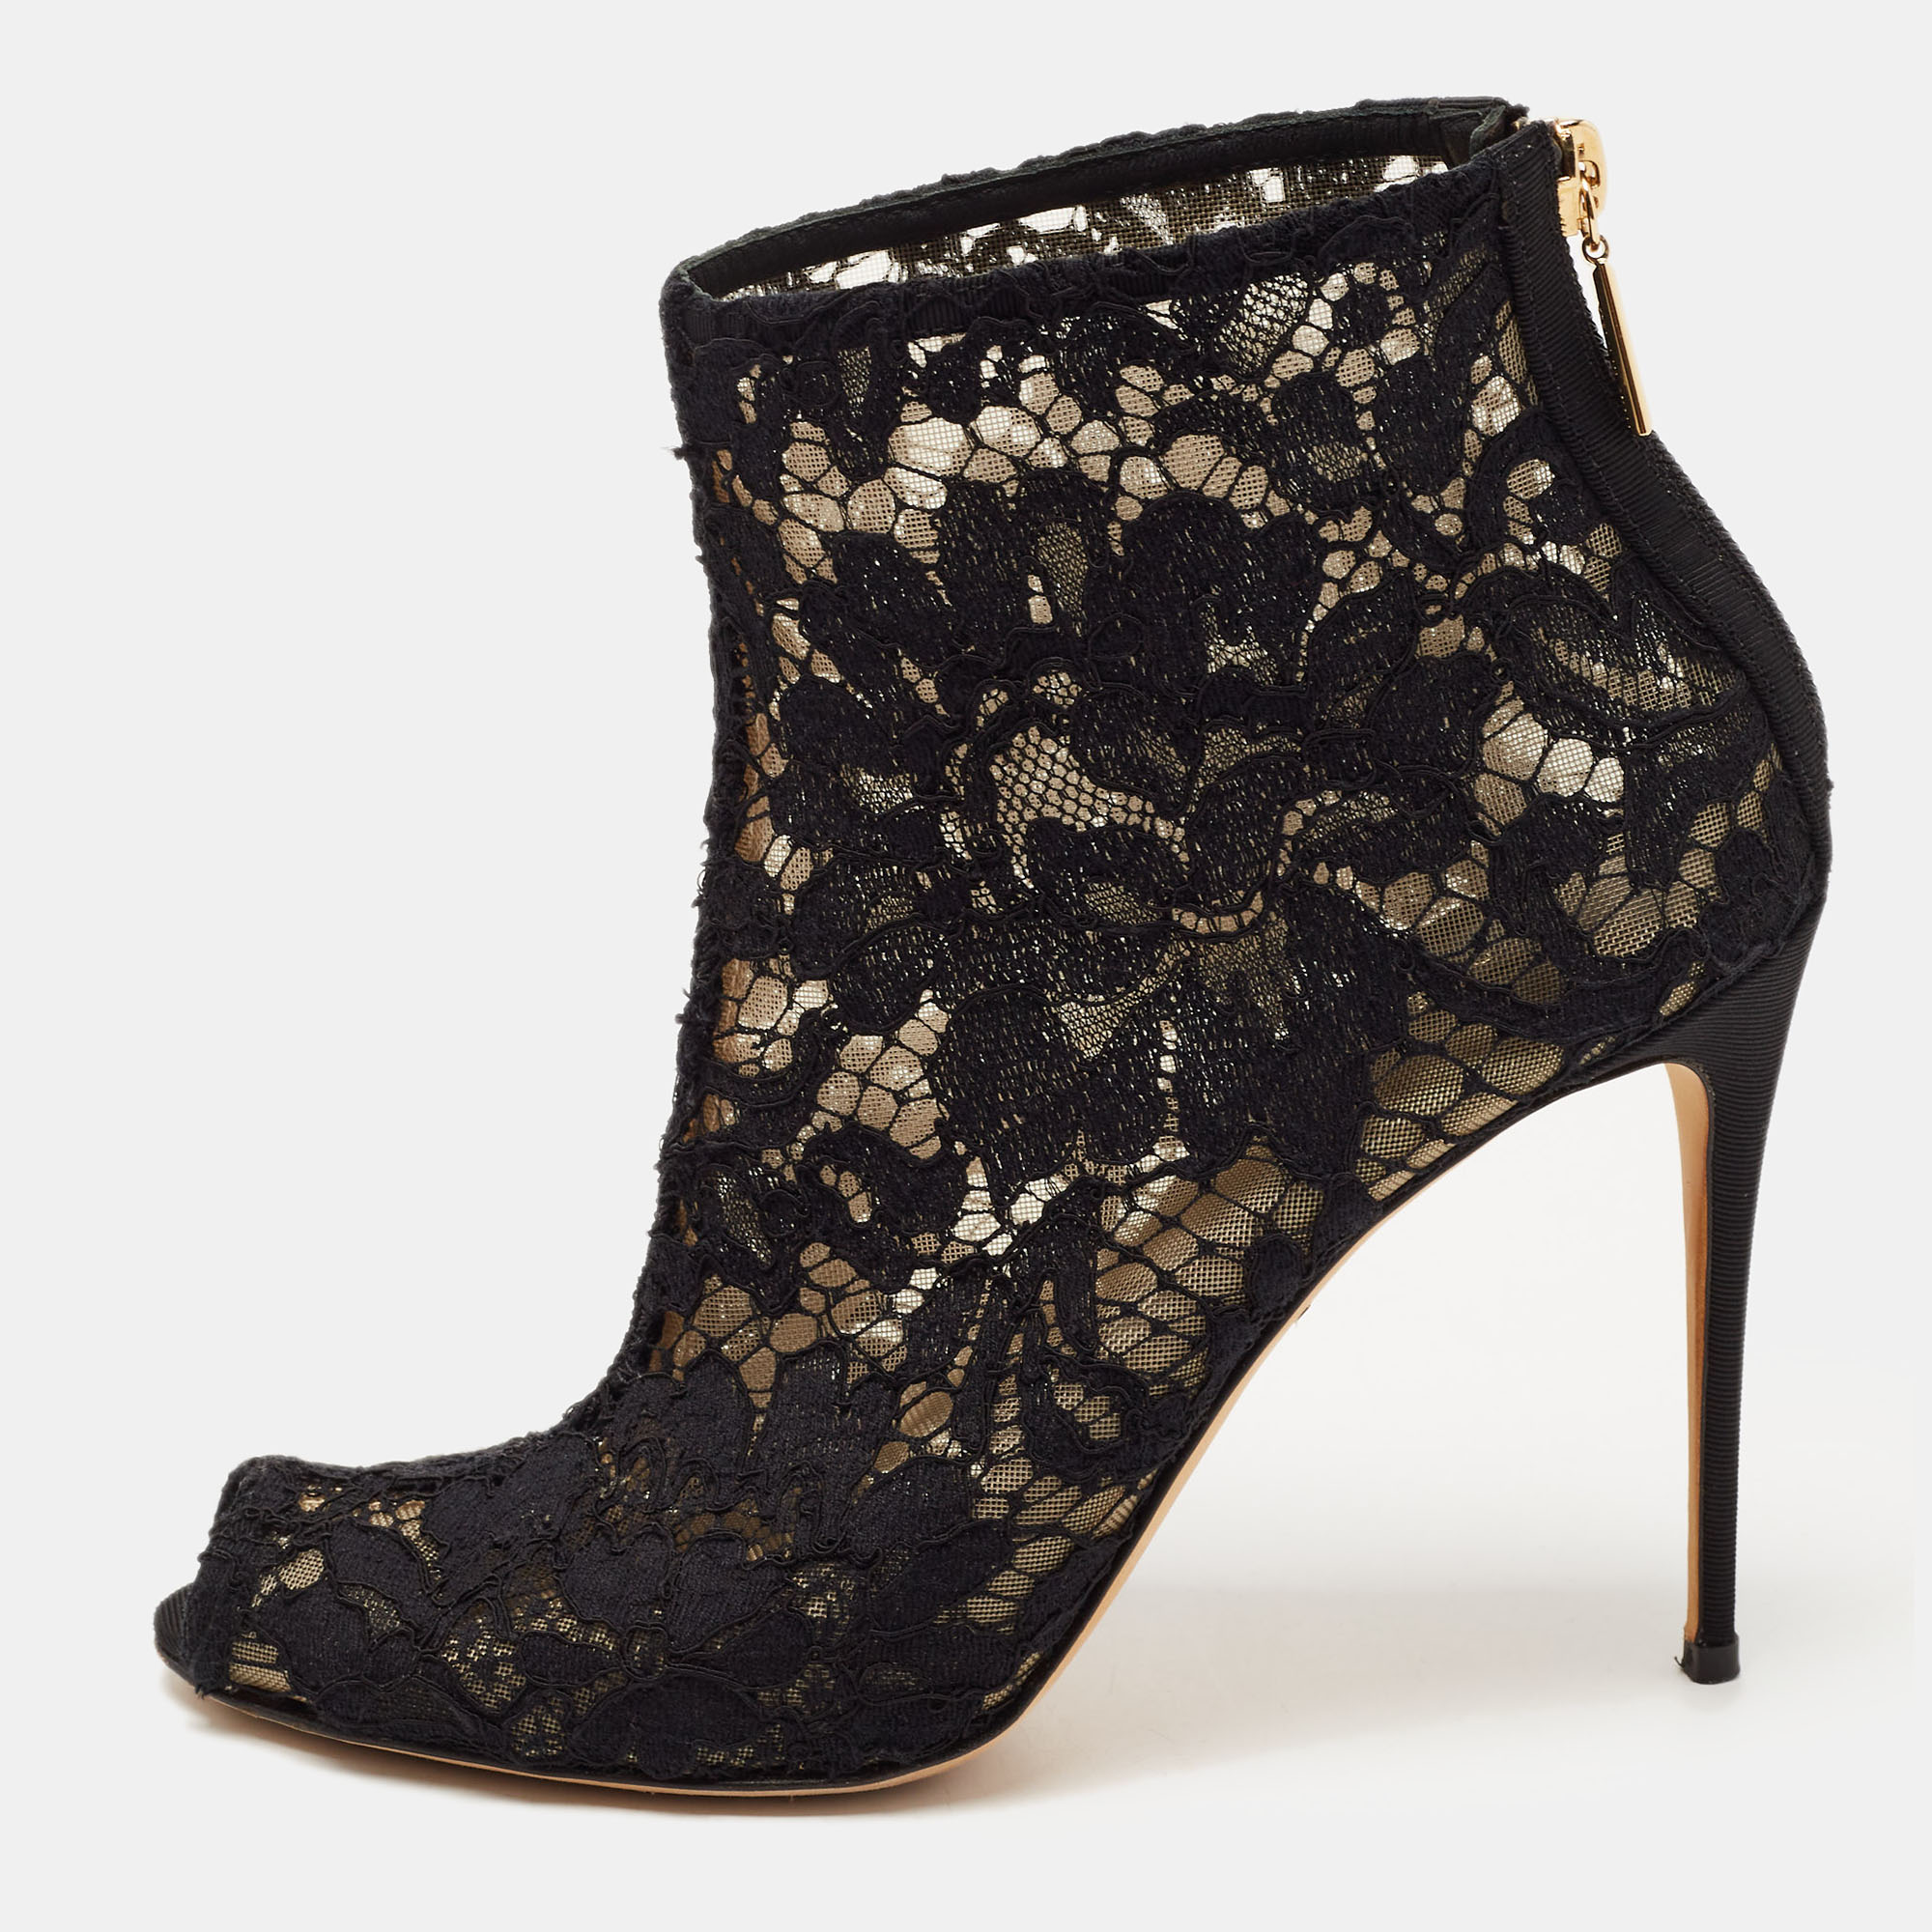 Dolce & Gabbana Black Lace And Mesh Ankle Boots Size 37.5